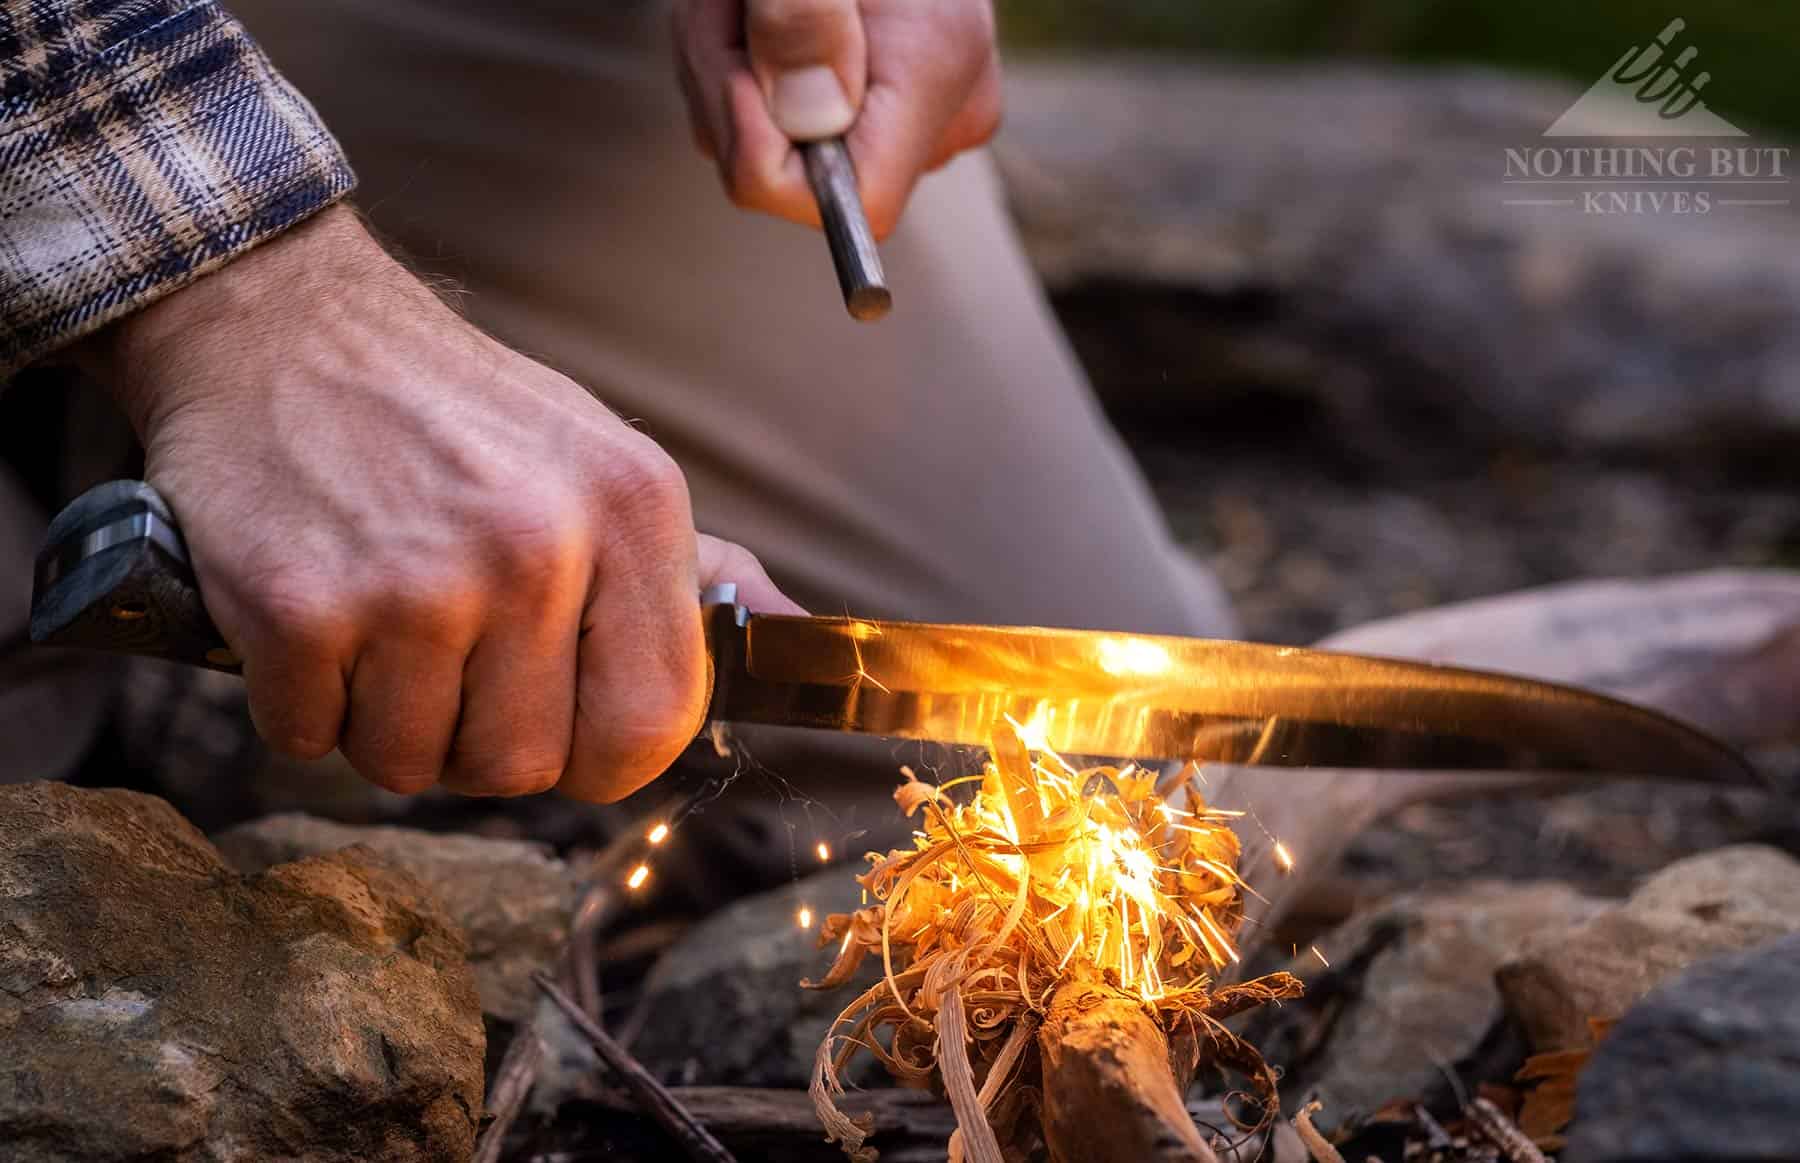 The Condor Plan A Bowie sparking a ferro rod to start a fire. This image shows this knife's fire making capabilities. 